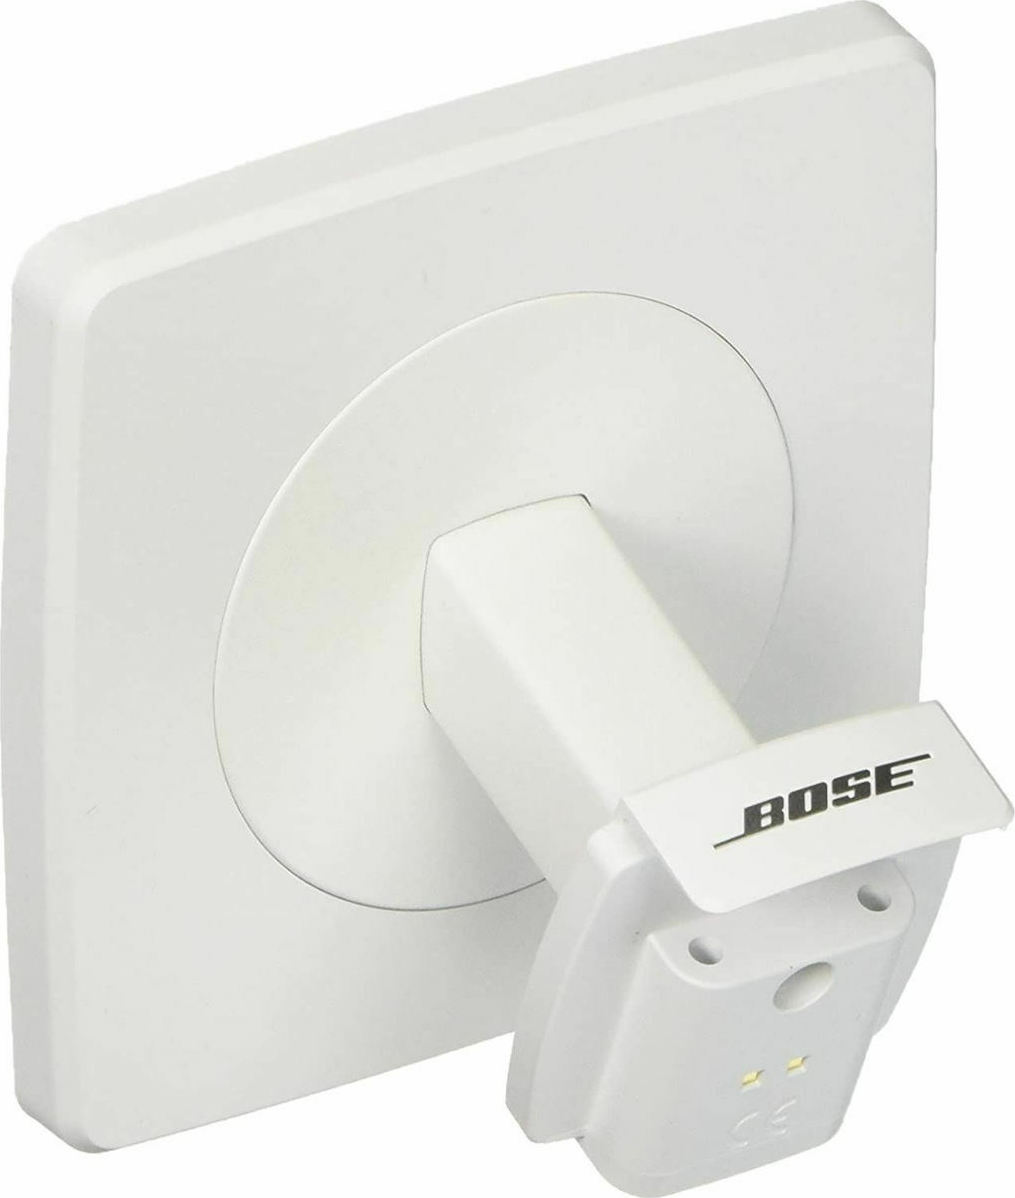 Bose Omnijewel Ceiling Mount Ceiling Mounts (Pair) in White Color